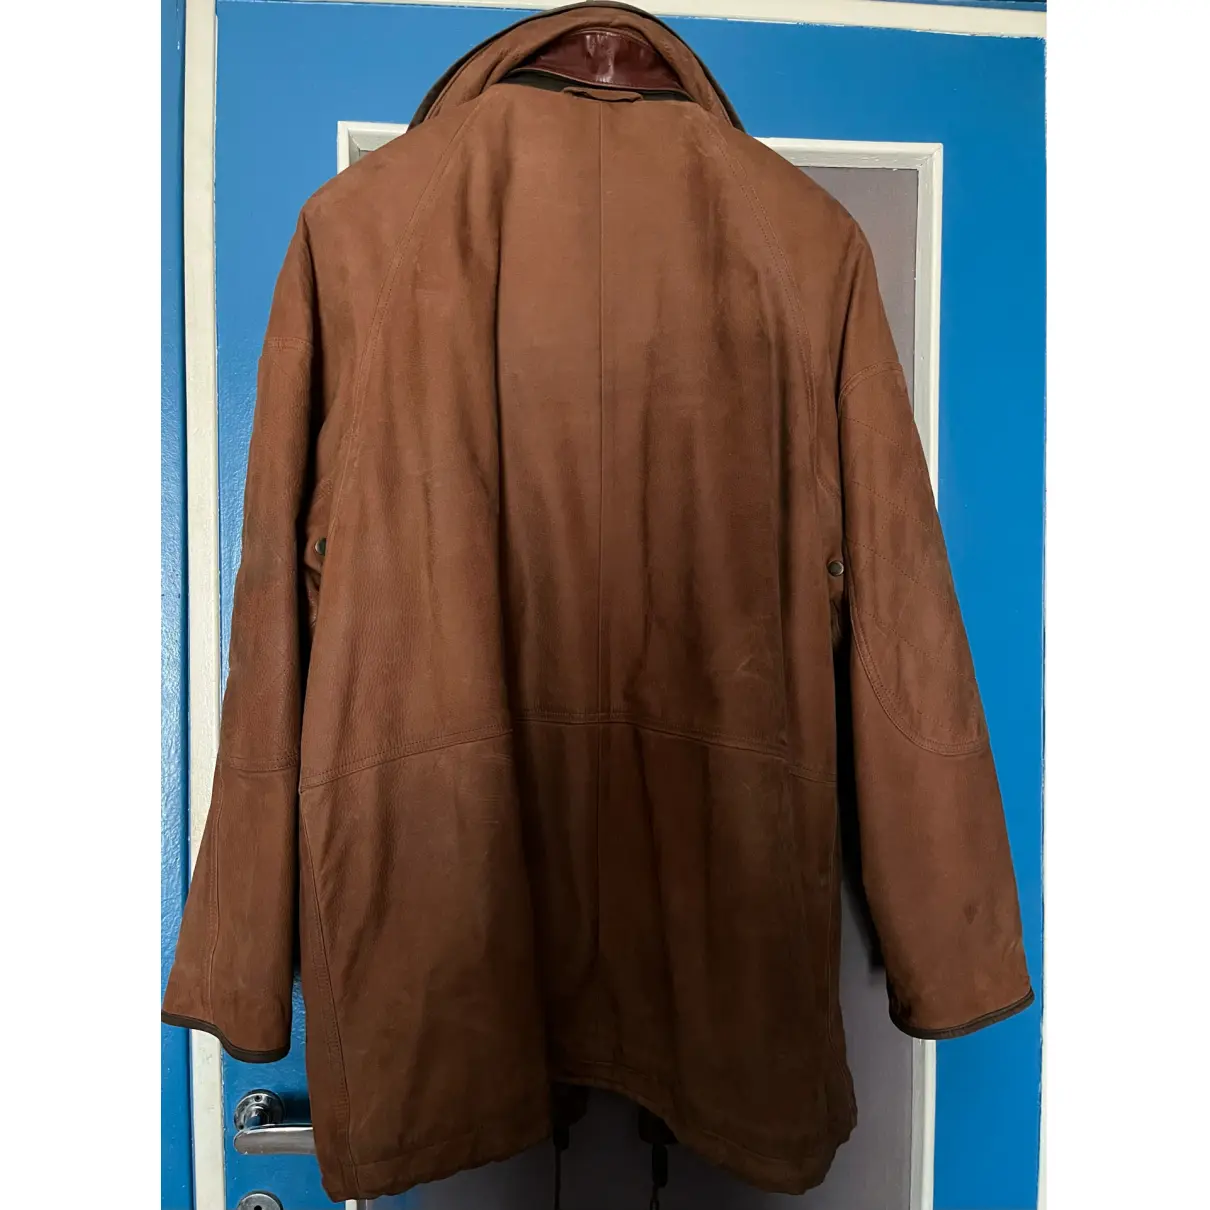 Buy Timberland Leather peacoat online - Vintage